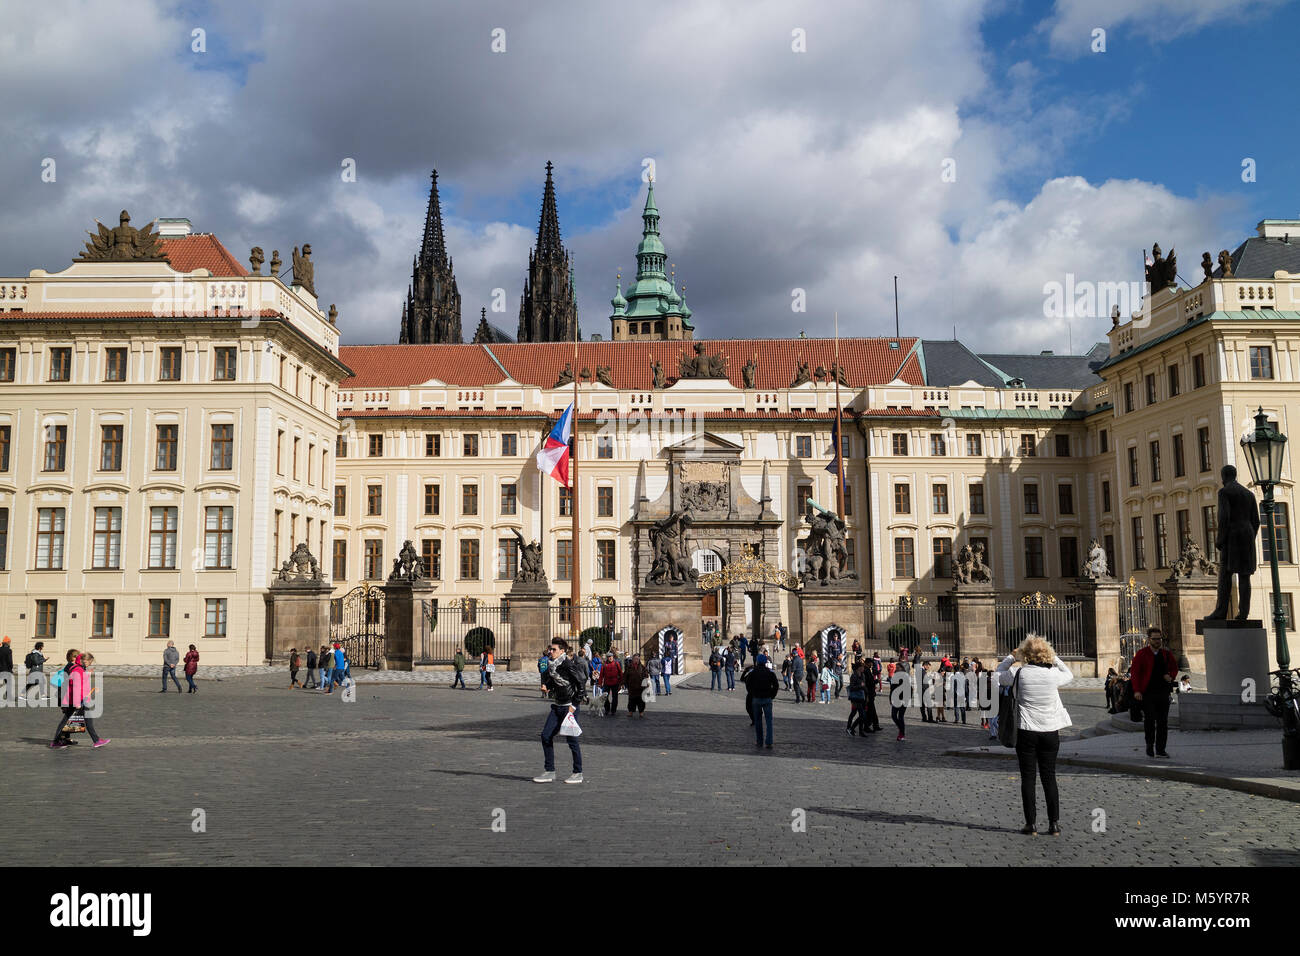 Prague, Czech Republic - October, 6, 2017: Entrance gate of Prague castle seen from  Hradcany Square with three towers in the background Stock Photo